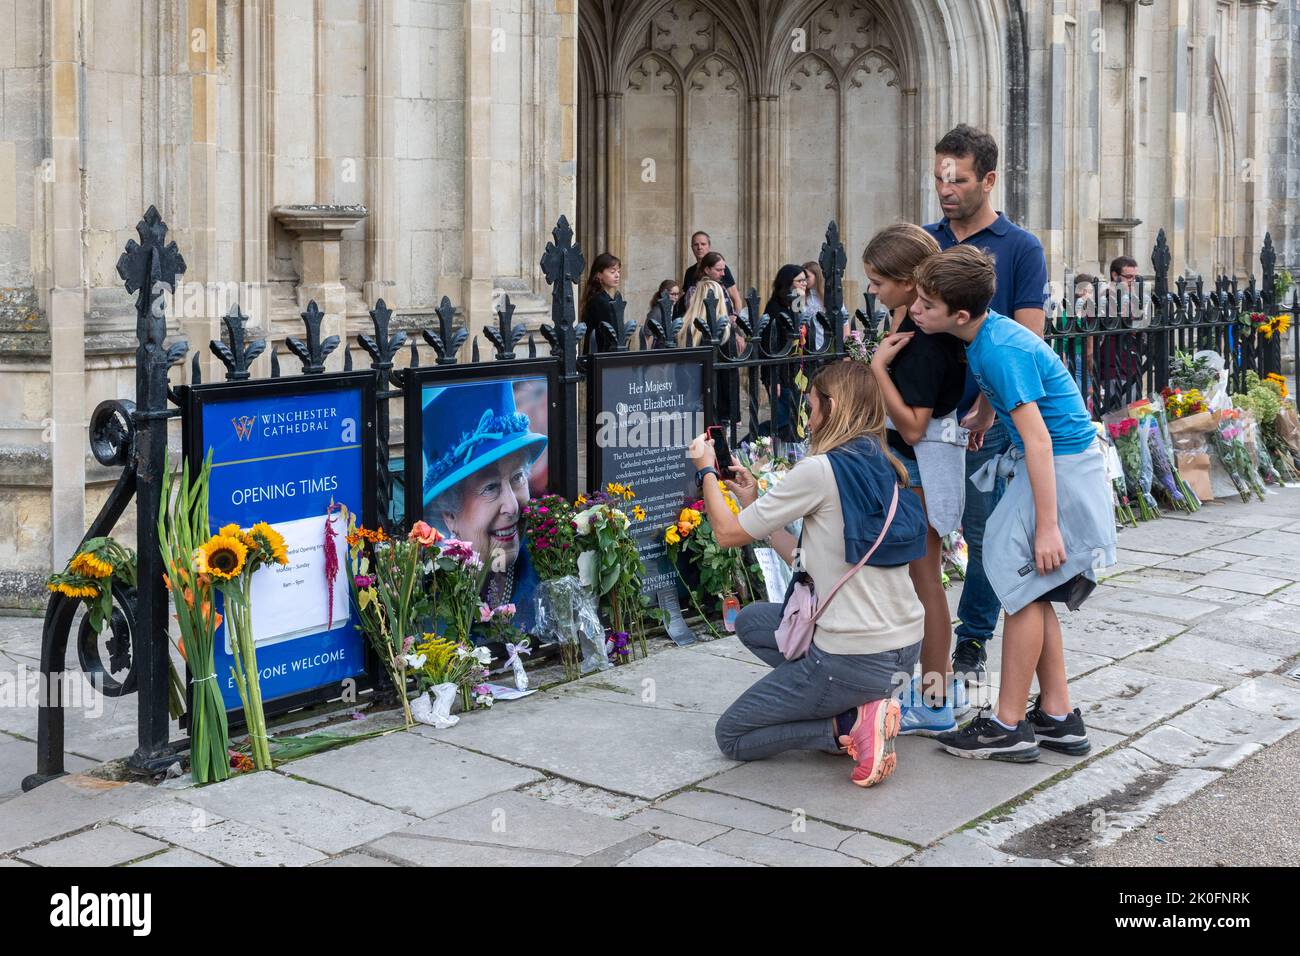 Winchester, Hampshire, UK. 11th September 2022. Following the death of Queen Elizabeth II on 8th September 2022, people have placed flowers and tributes in honour of Queen Elizabeth II outside the entrance to Winchester Cathedral. The country is in a period of national mourning until her funeral. Stock Photo